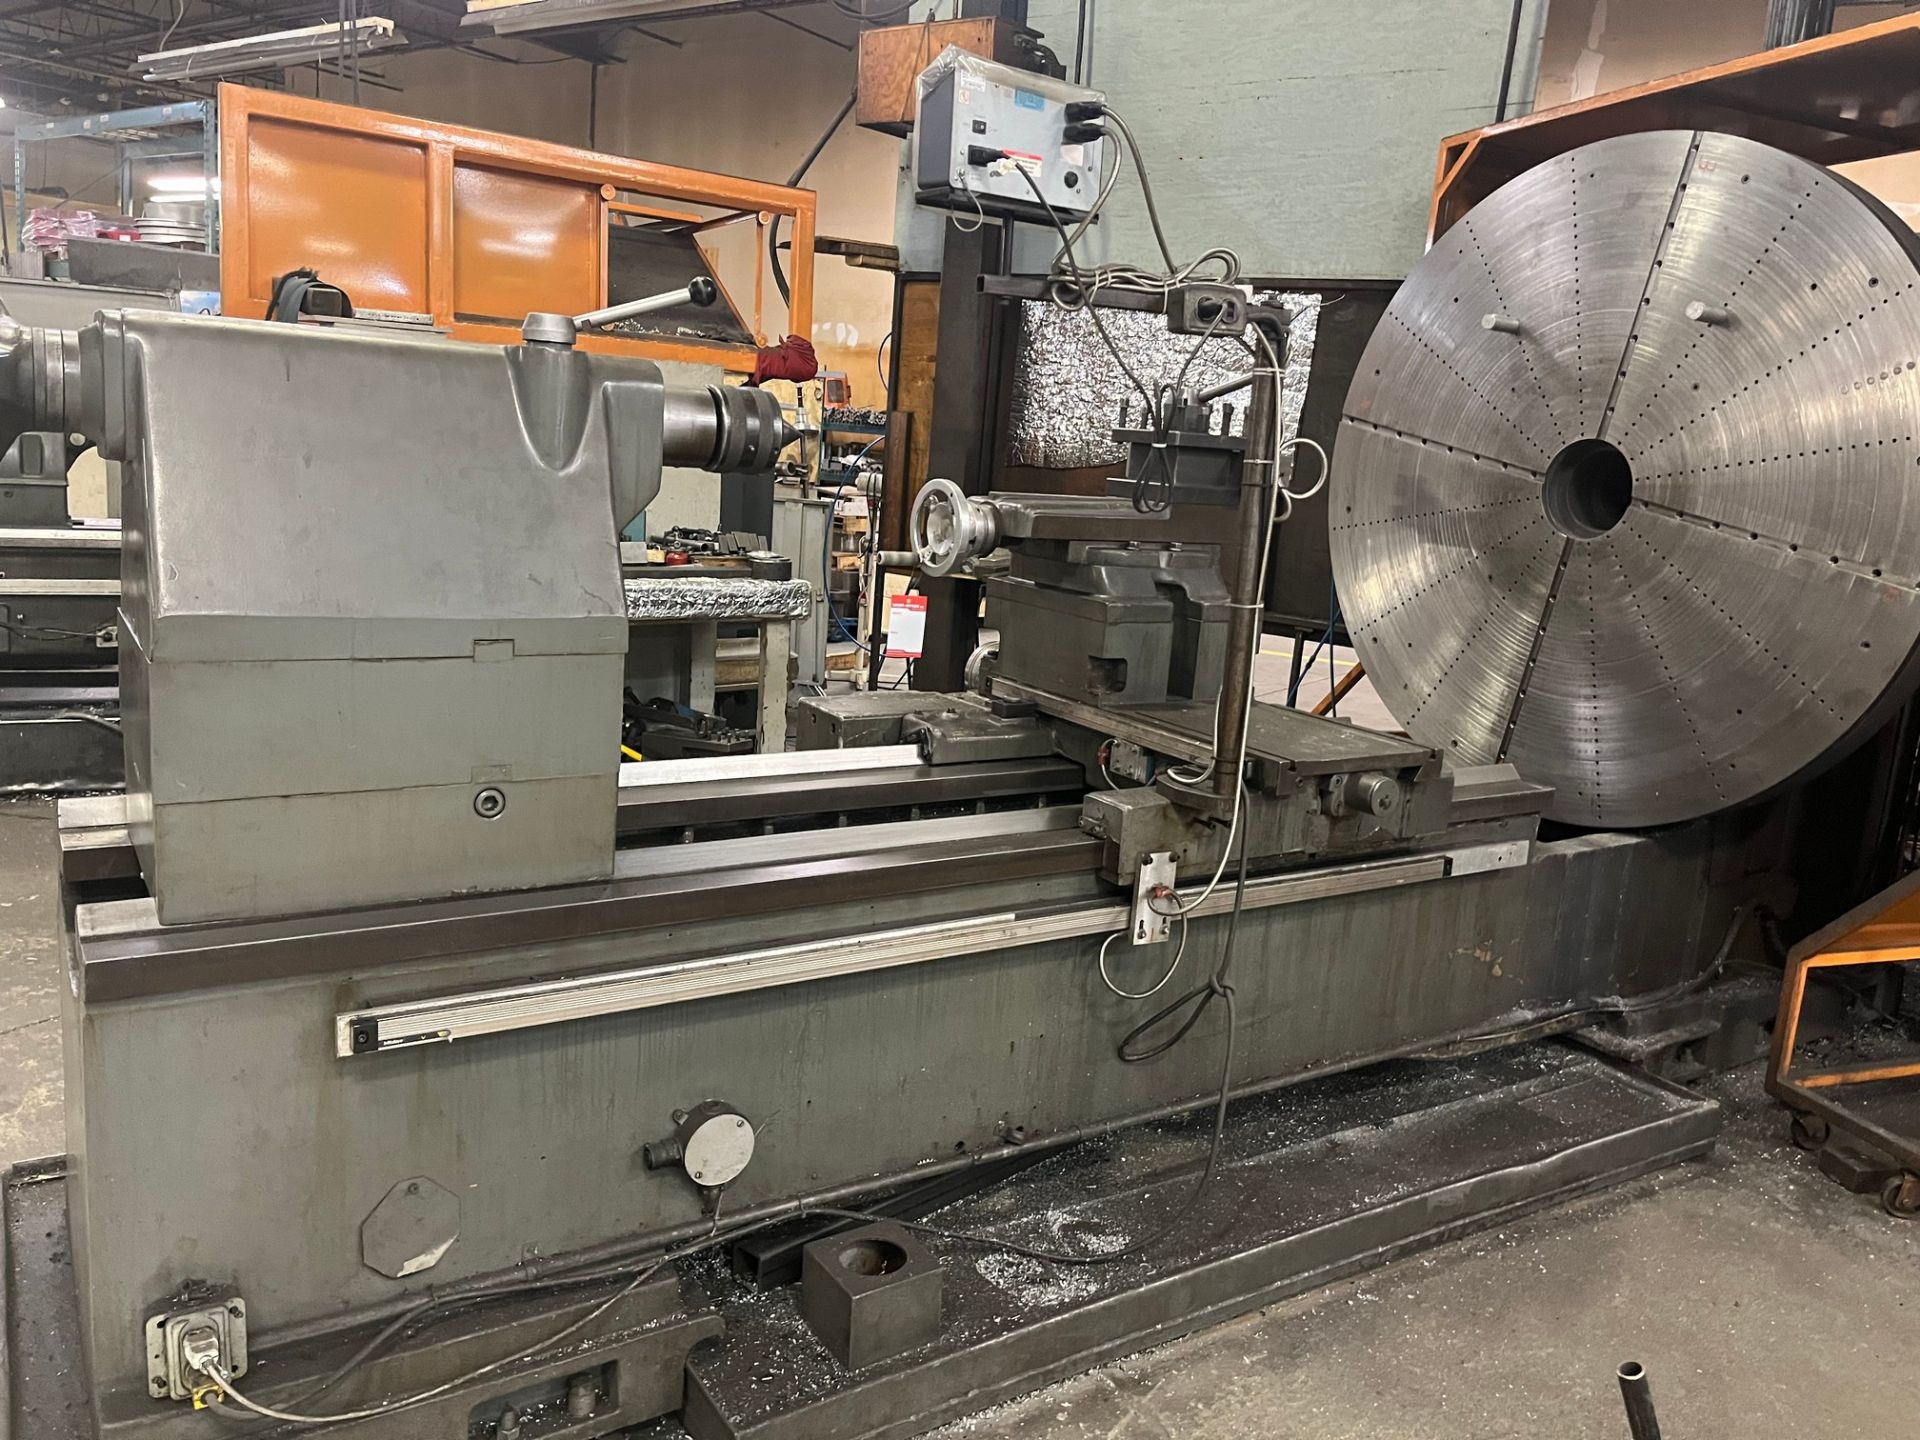 SIRCO PA-36 GAP BED ENGINE LATHE, MITUTOYO 2-AXIS DRO, 36” SWING OVER BED, 60” SWING OVER GAP, 80” - Image 4 of 5